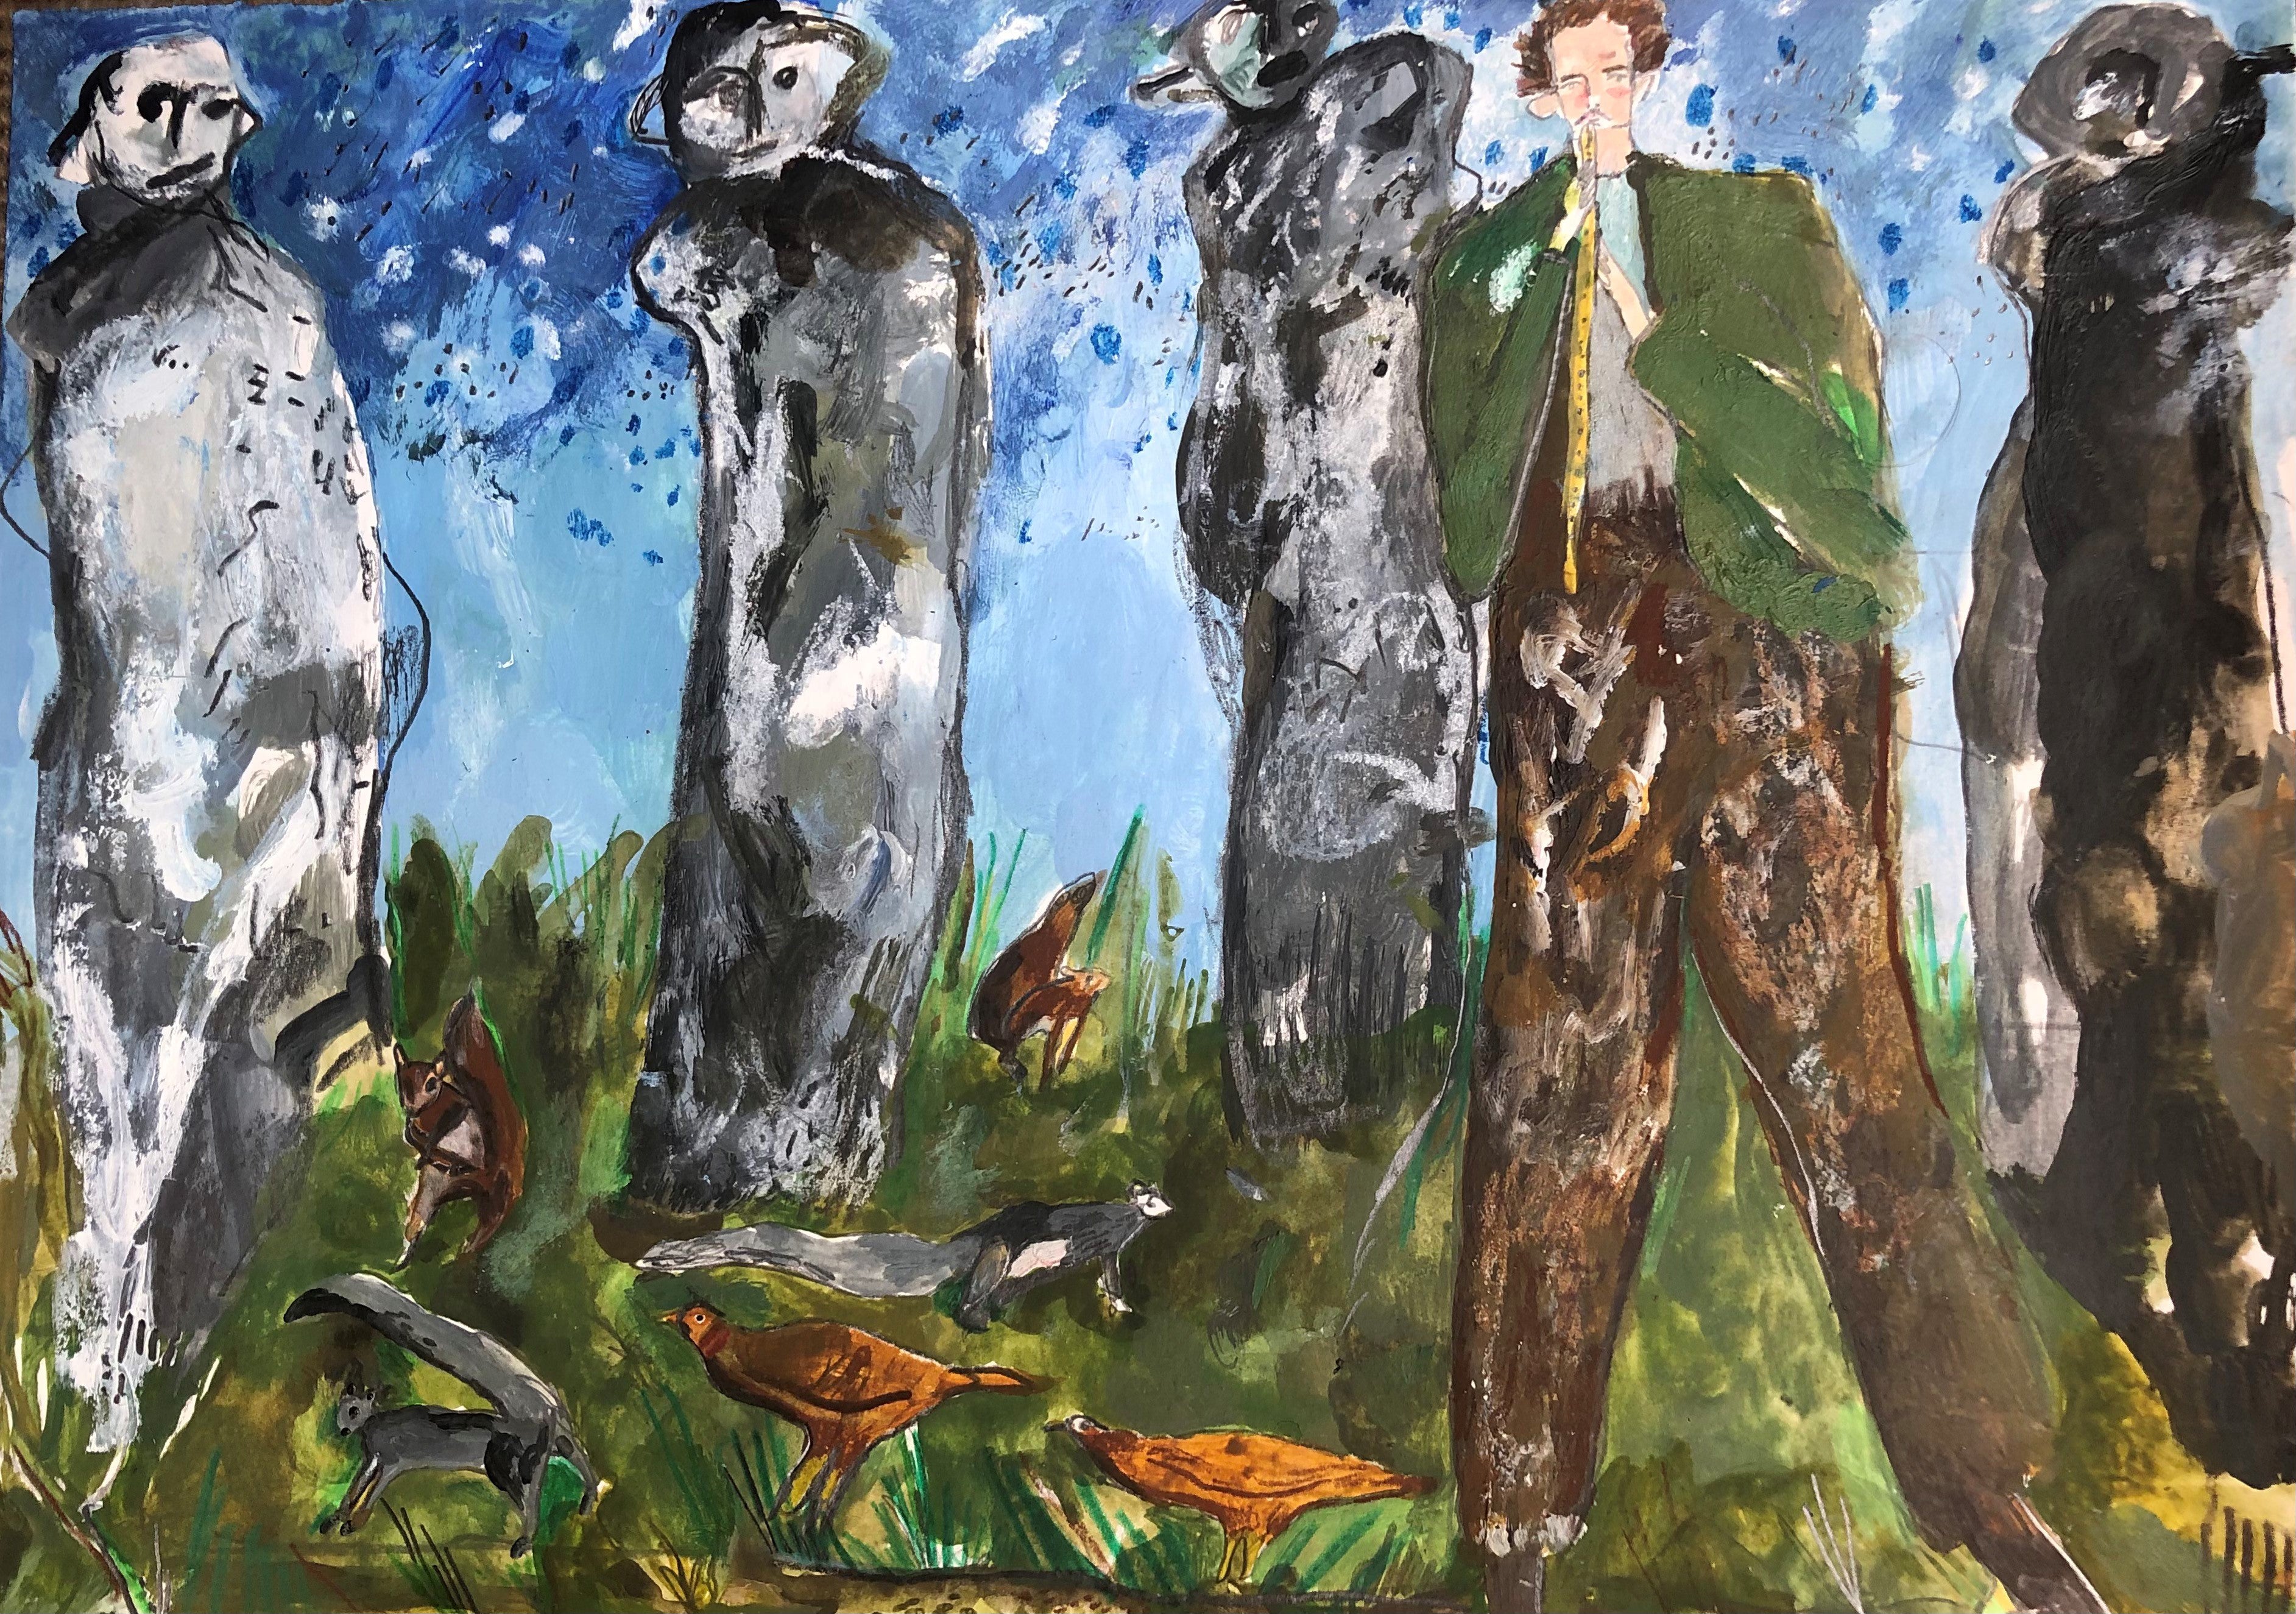 Melissa Kime 'Piper, pheasants, squirrels and standing stones'. 2021 Acrylic, watercolour, coloured pencil on paper 21x29.7cm